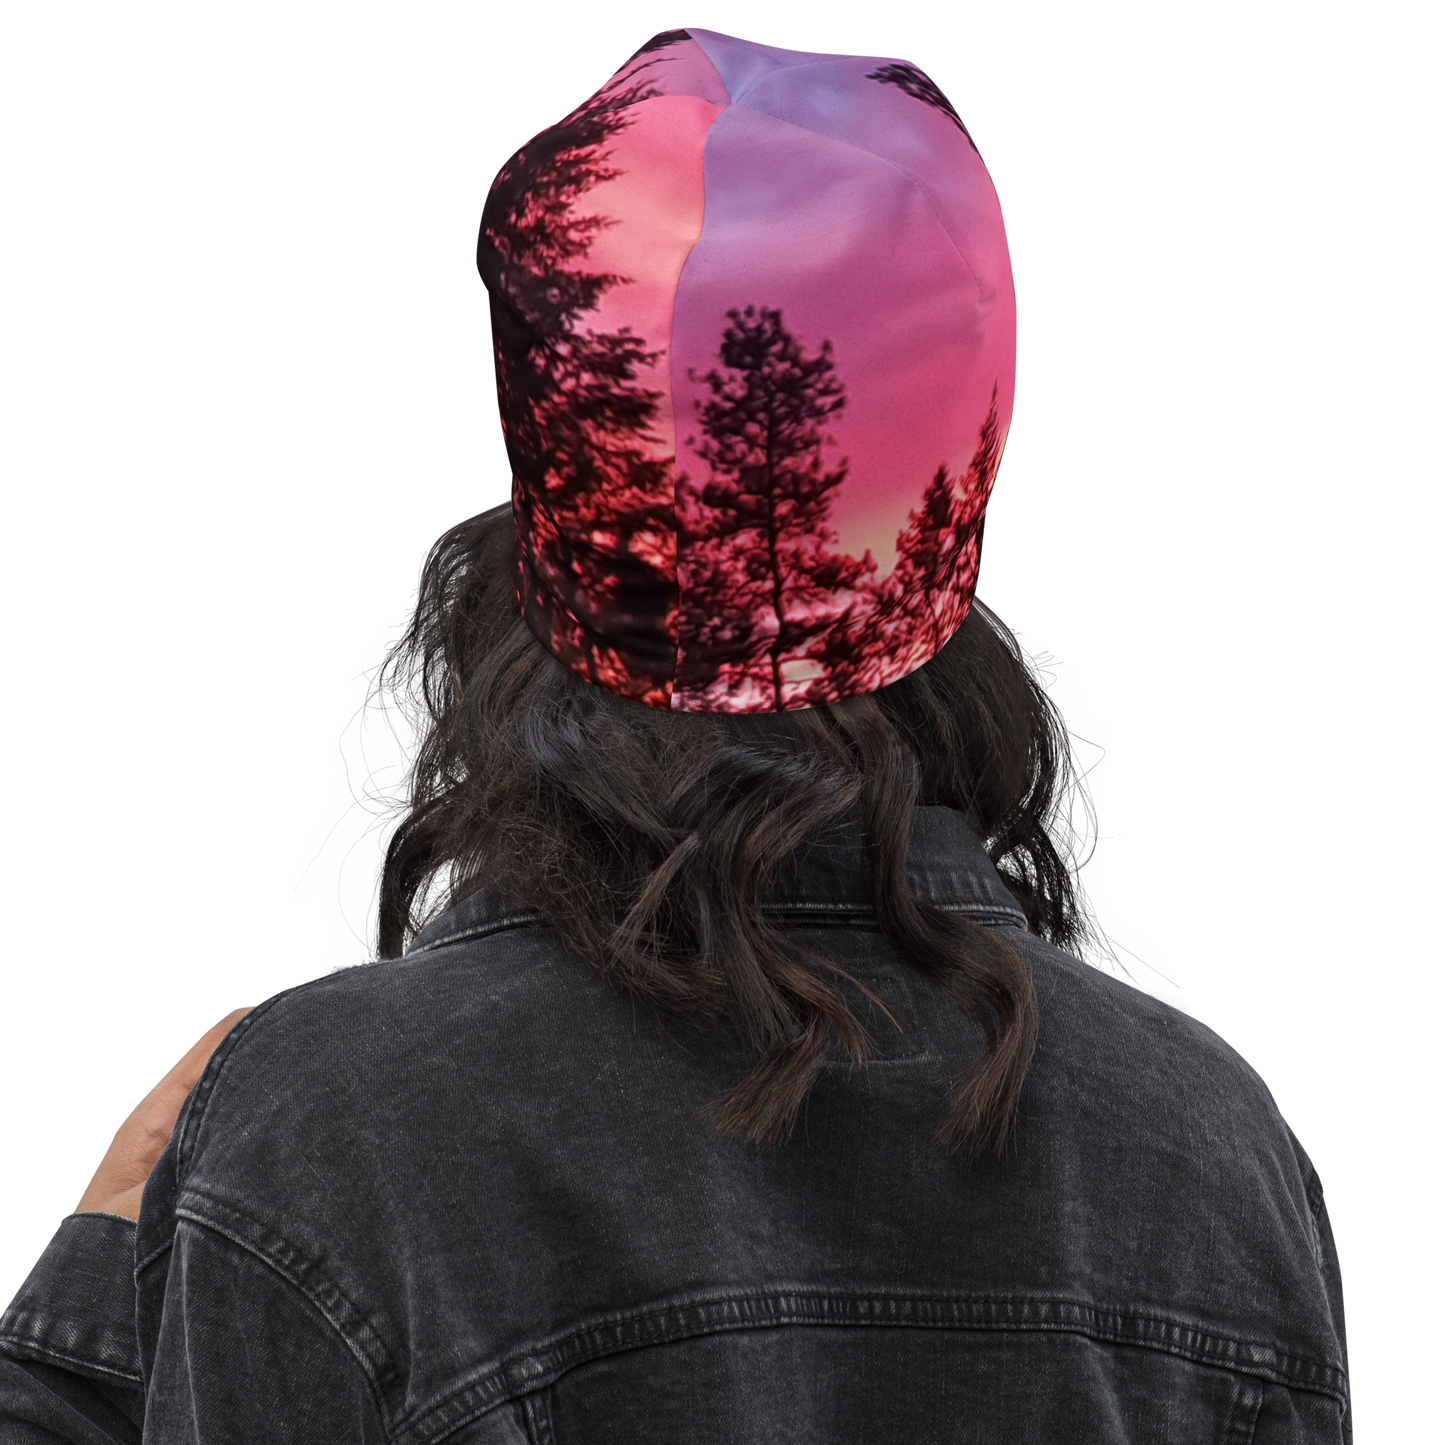 The EARTH LOVE Collection - "Sunset Silhouettes" Design Beanie - Lightweight, Cute Chemo Hat